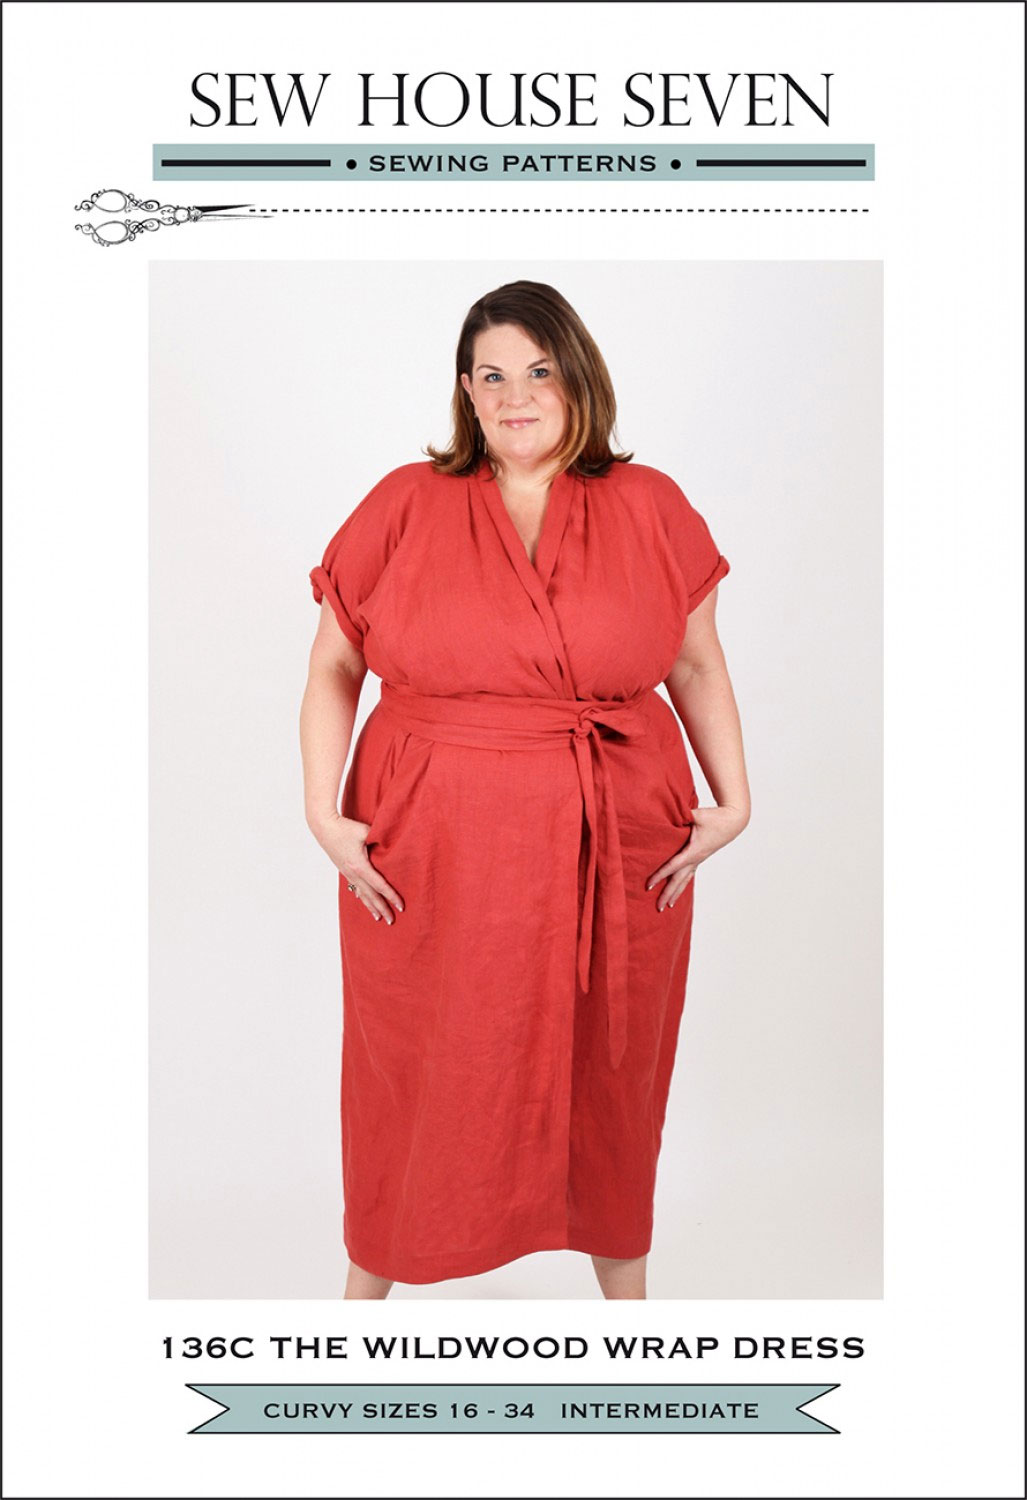 The-Wildwood-Wrap-Dress-Curvy-sewing-pattern-Sew-House-Seven-front